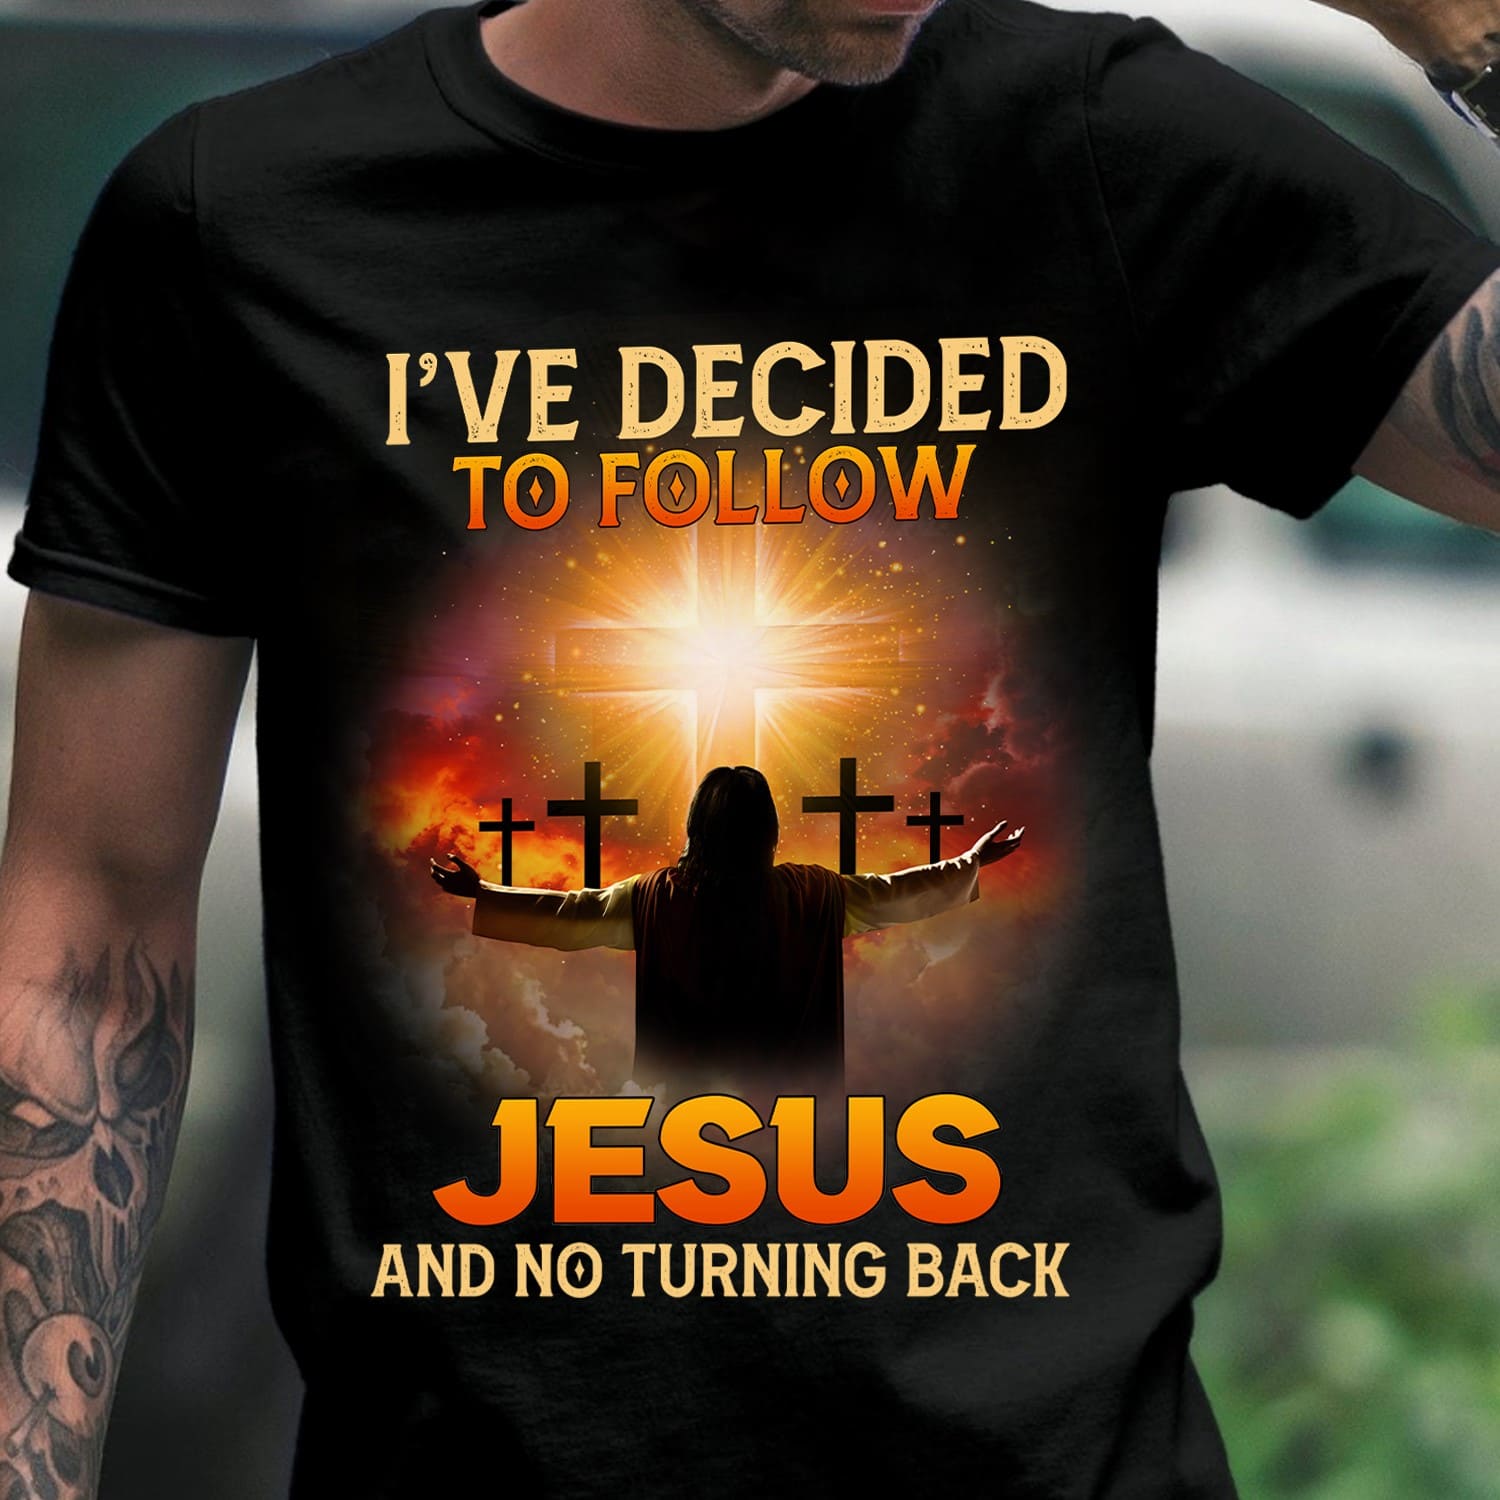 Jesus God's Cross - I've decided to follow jesus and no turning back